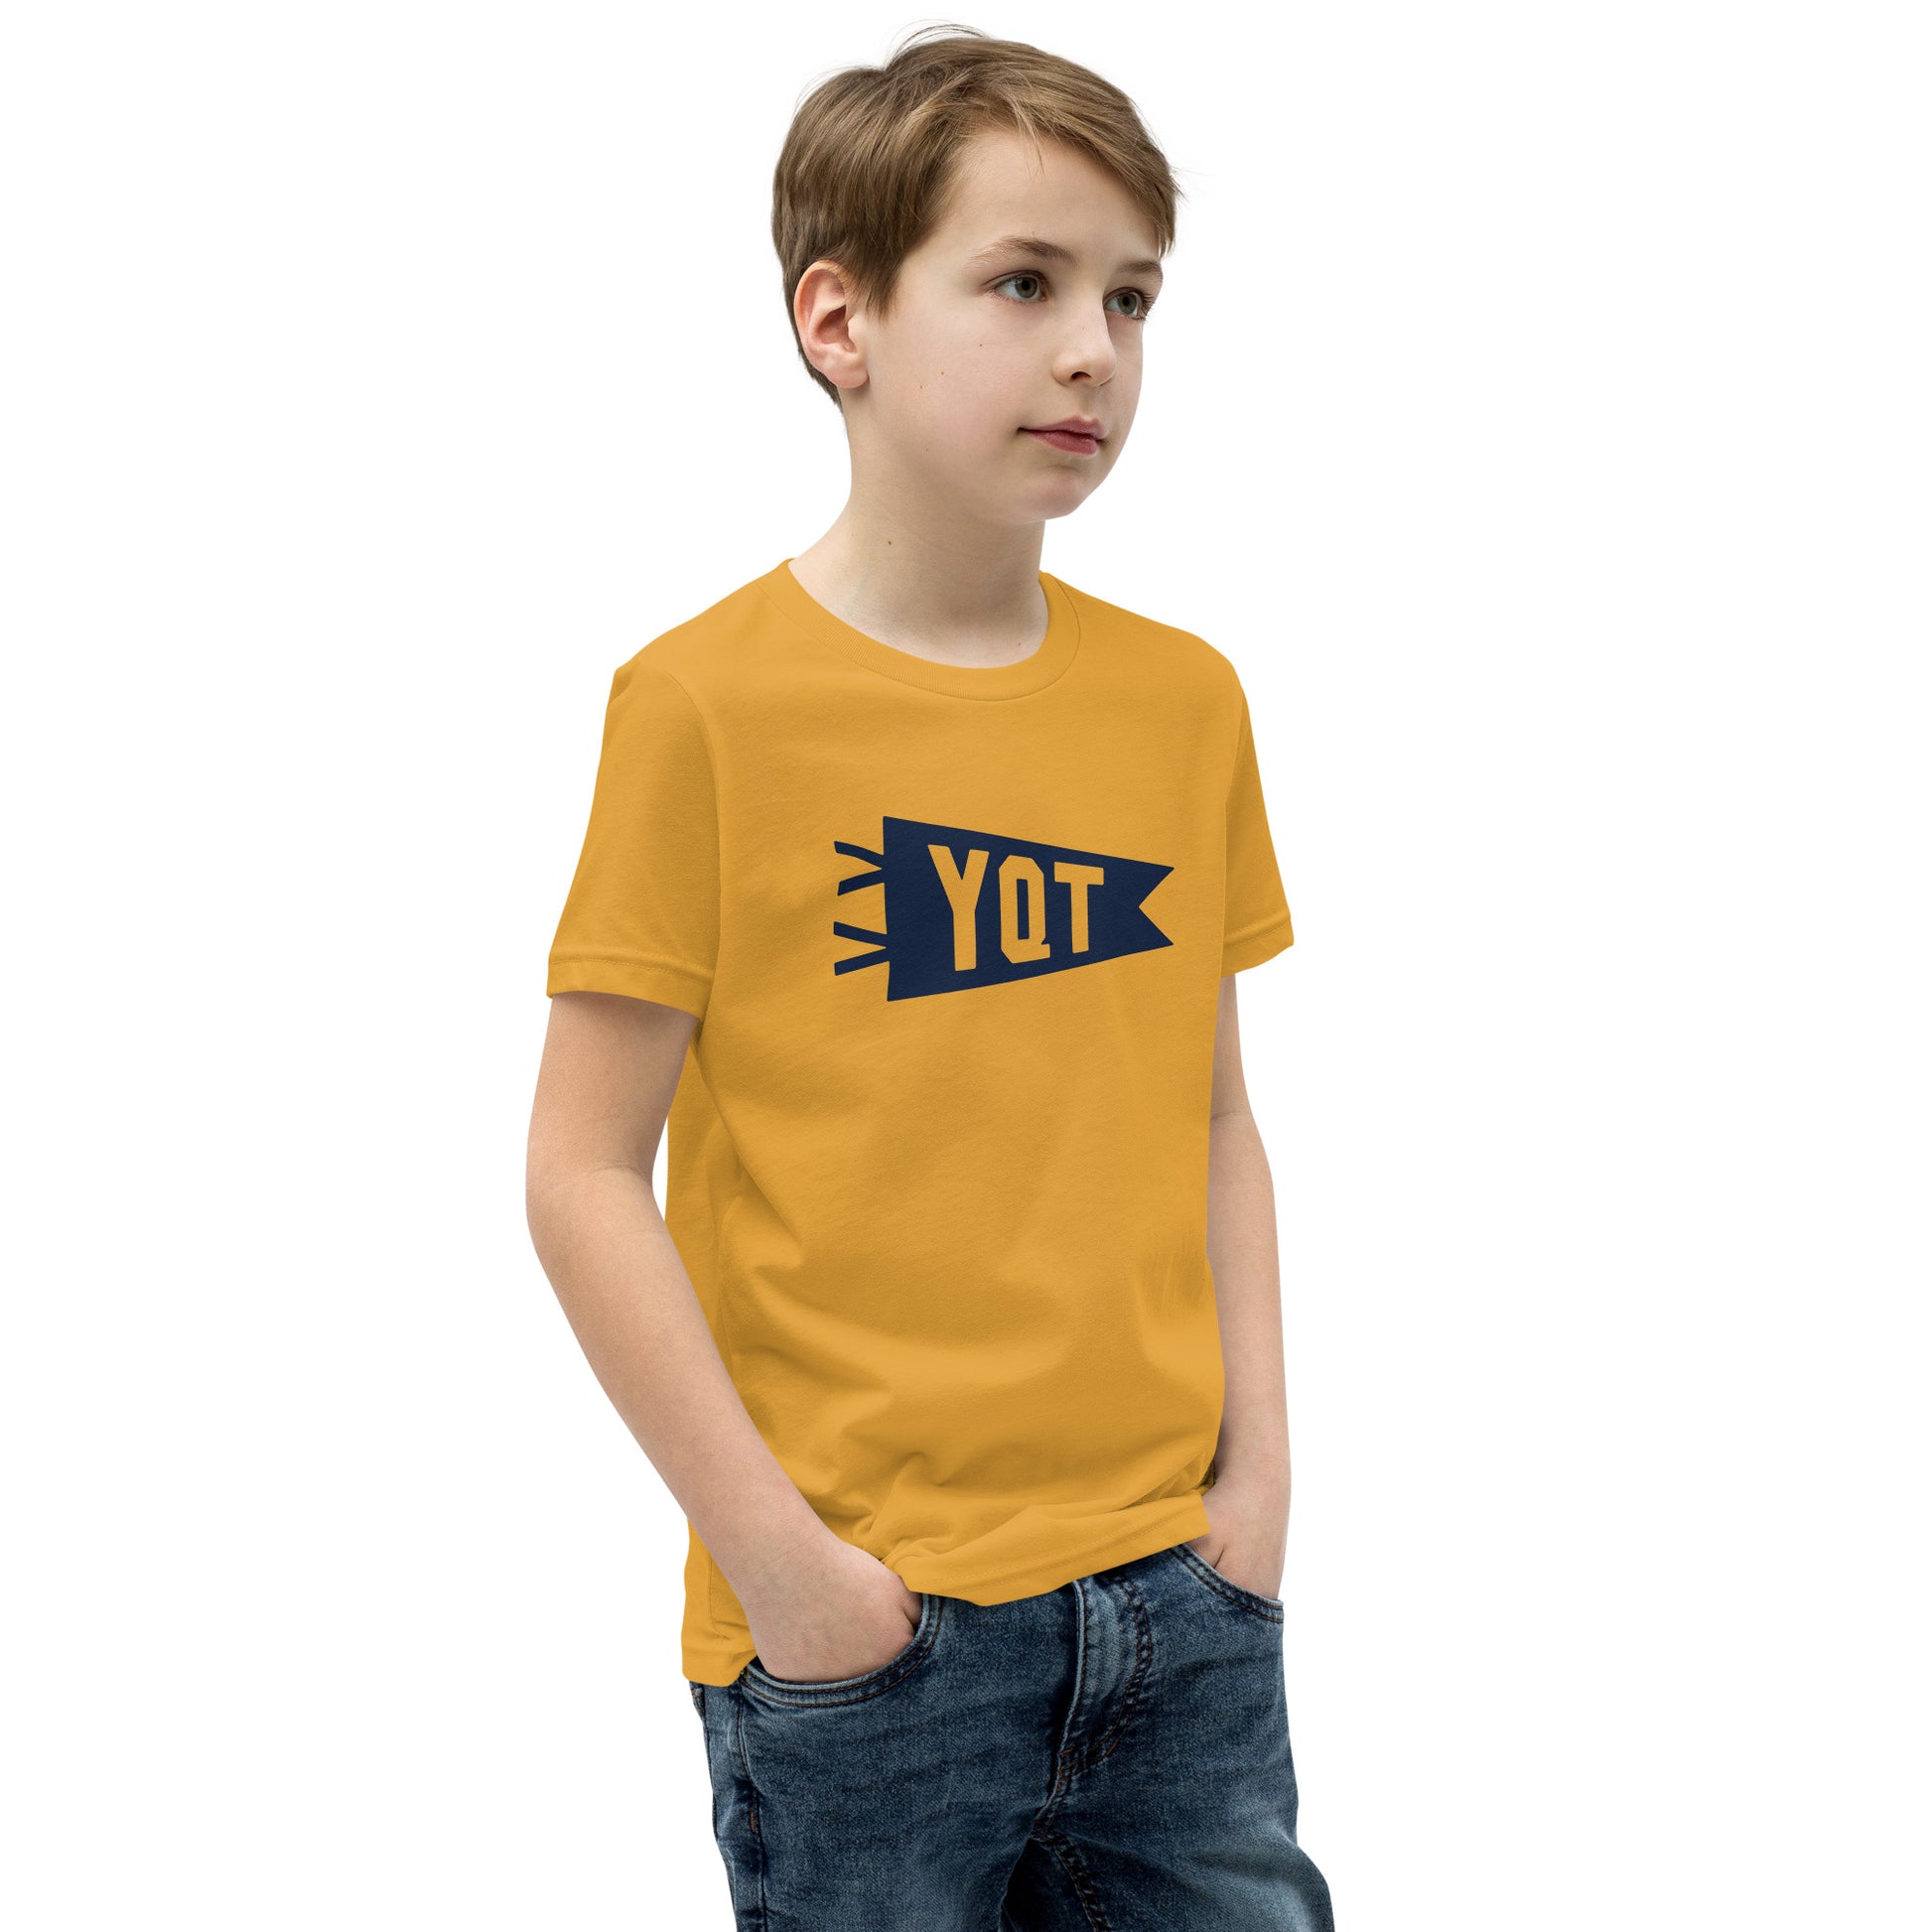 Kid's Airport Code Tee - Navy Blue Graphic • YQT Thunder Bay • YHM Designs - Image 07